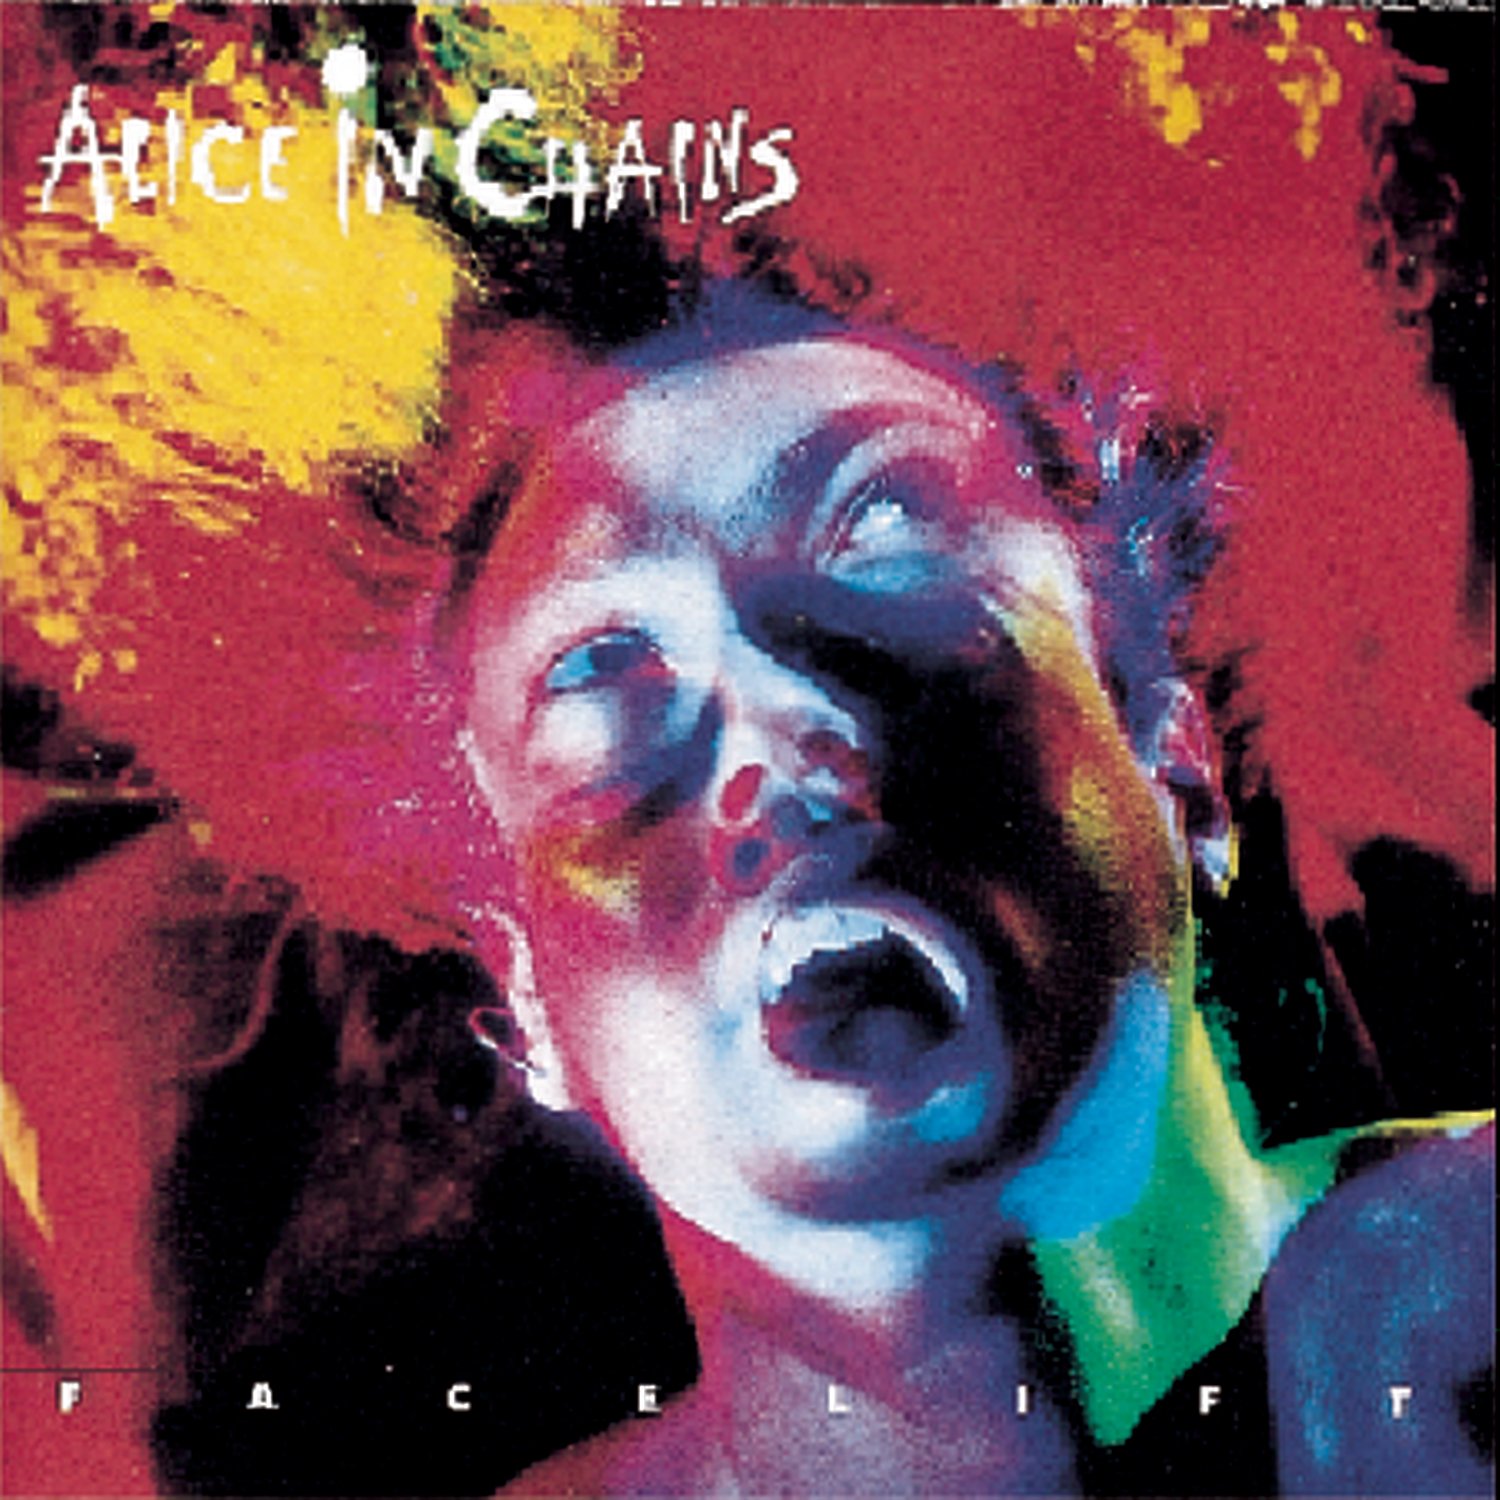 Art for We Die Young by Alice In Chains